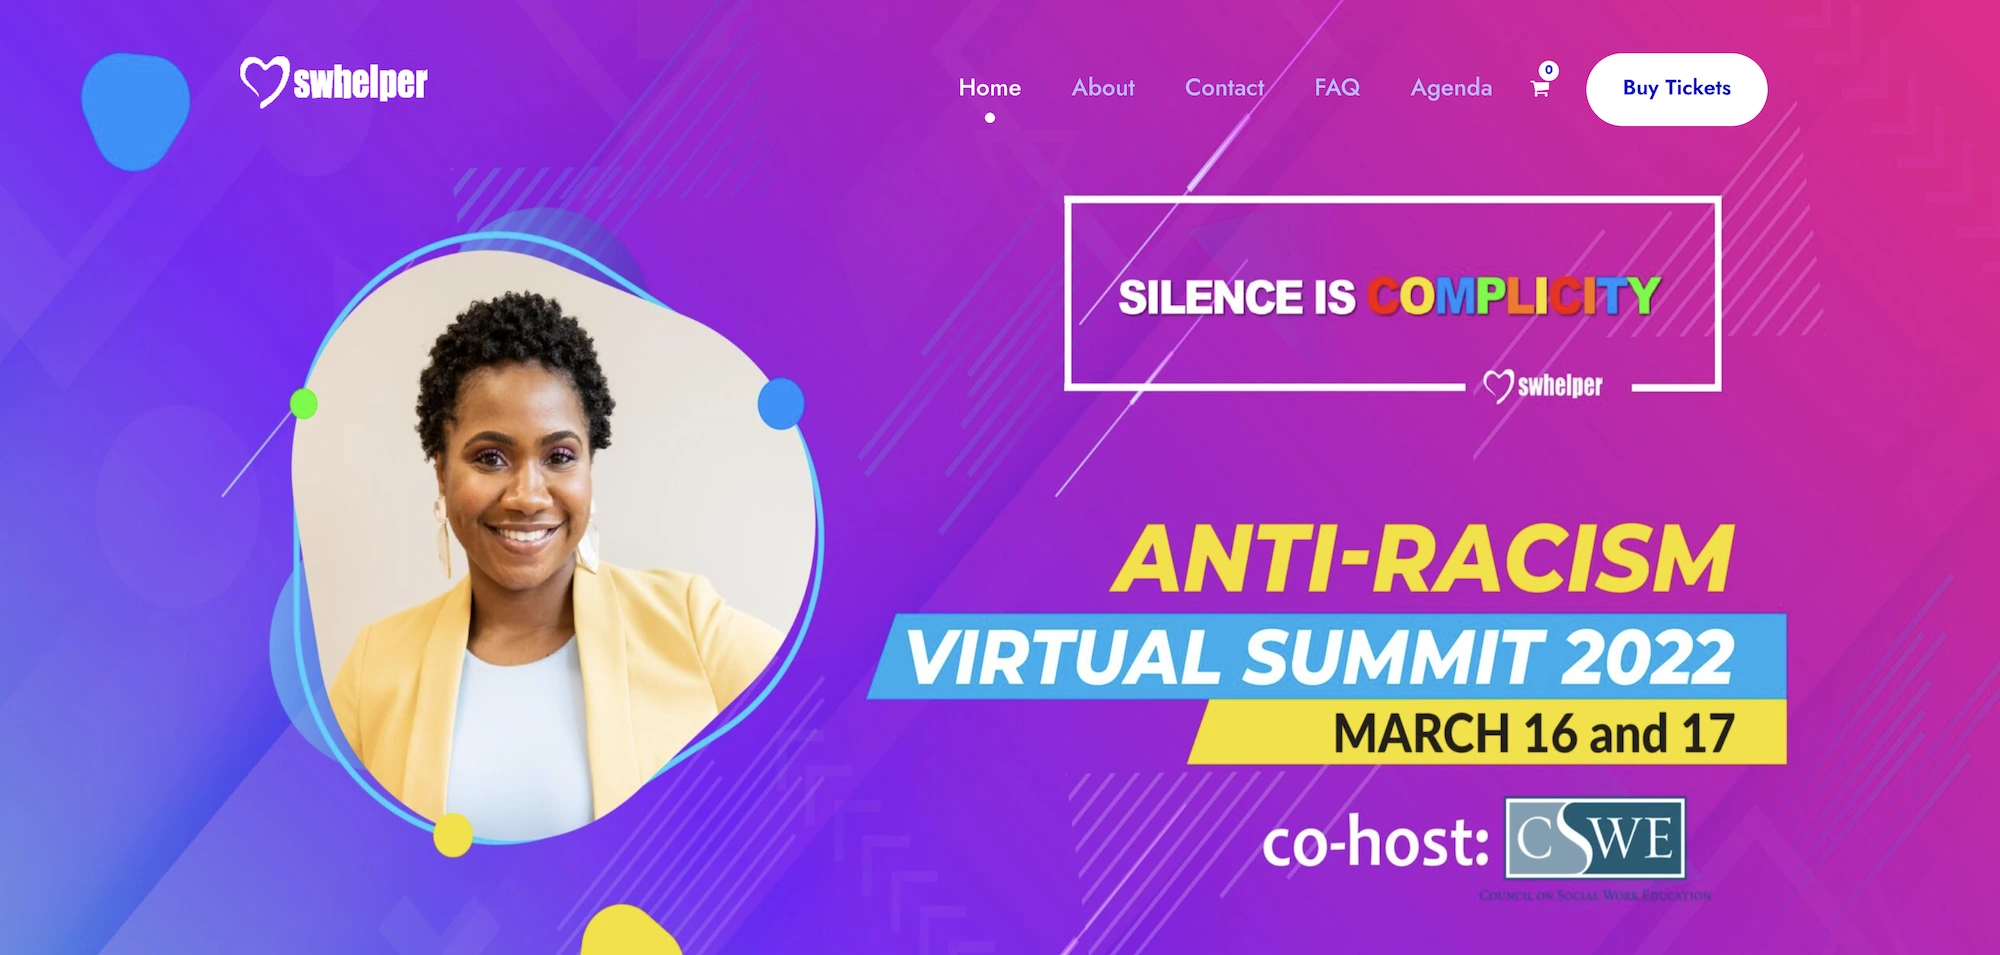 Screenshot of the event page for SW Helper's Anti-Racism Virtual Summit with an image of a woman and the event agenda.